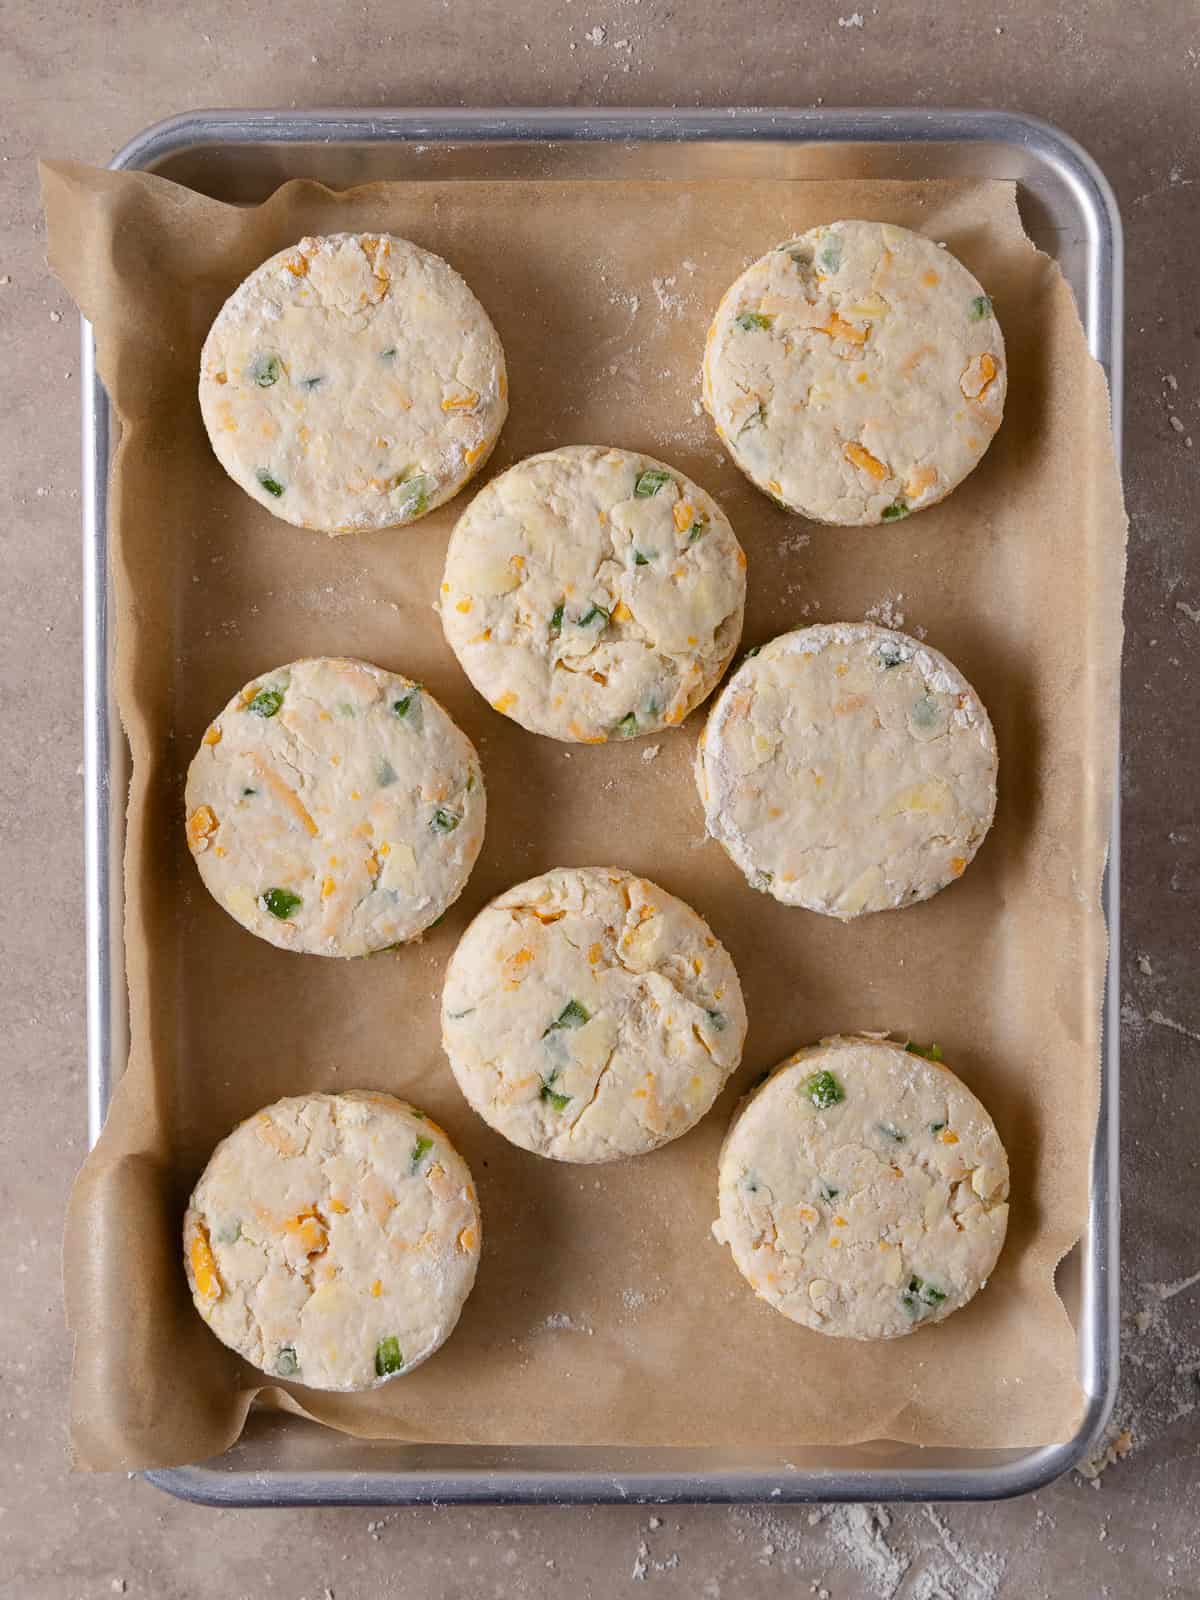 Biscuits are placed on a tray and ready for the freezer.